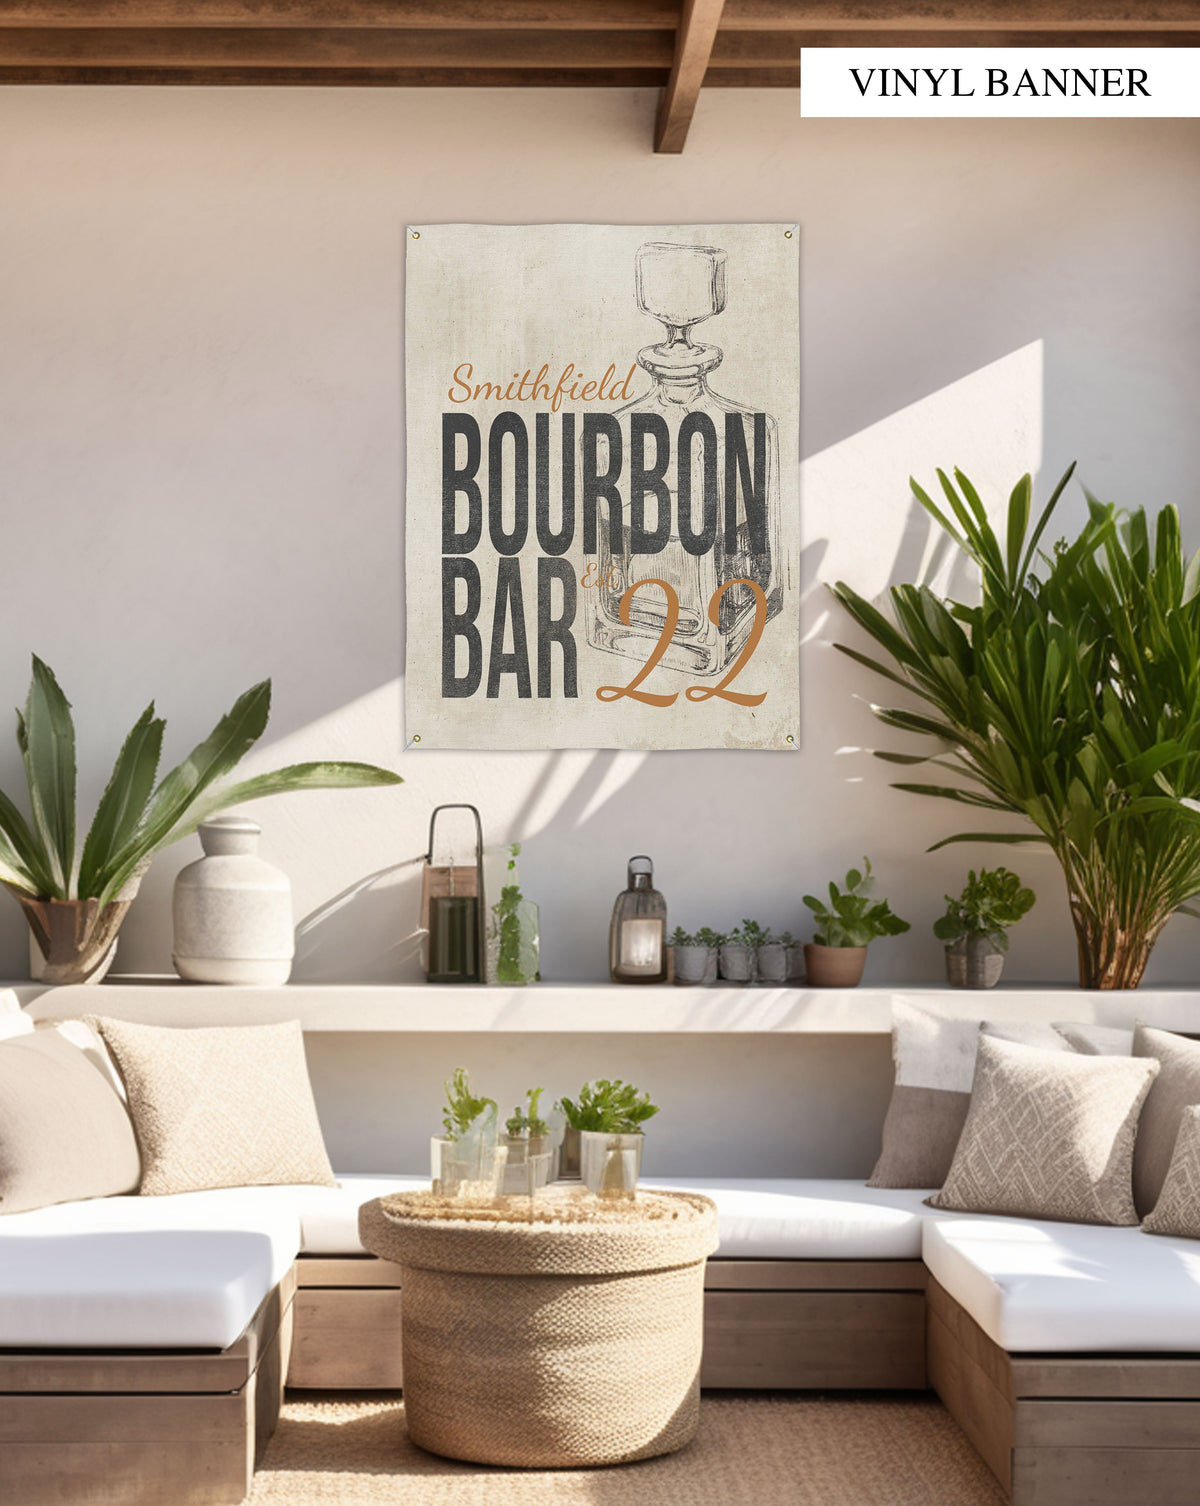 Distinctive Bourbon Bar vinyl banner, with a vintage linen background and decanter graphic, ideal for creating an inviting atmosphere.